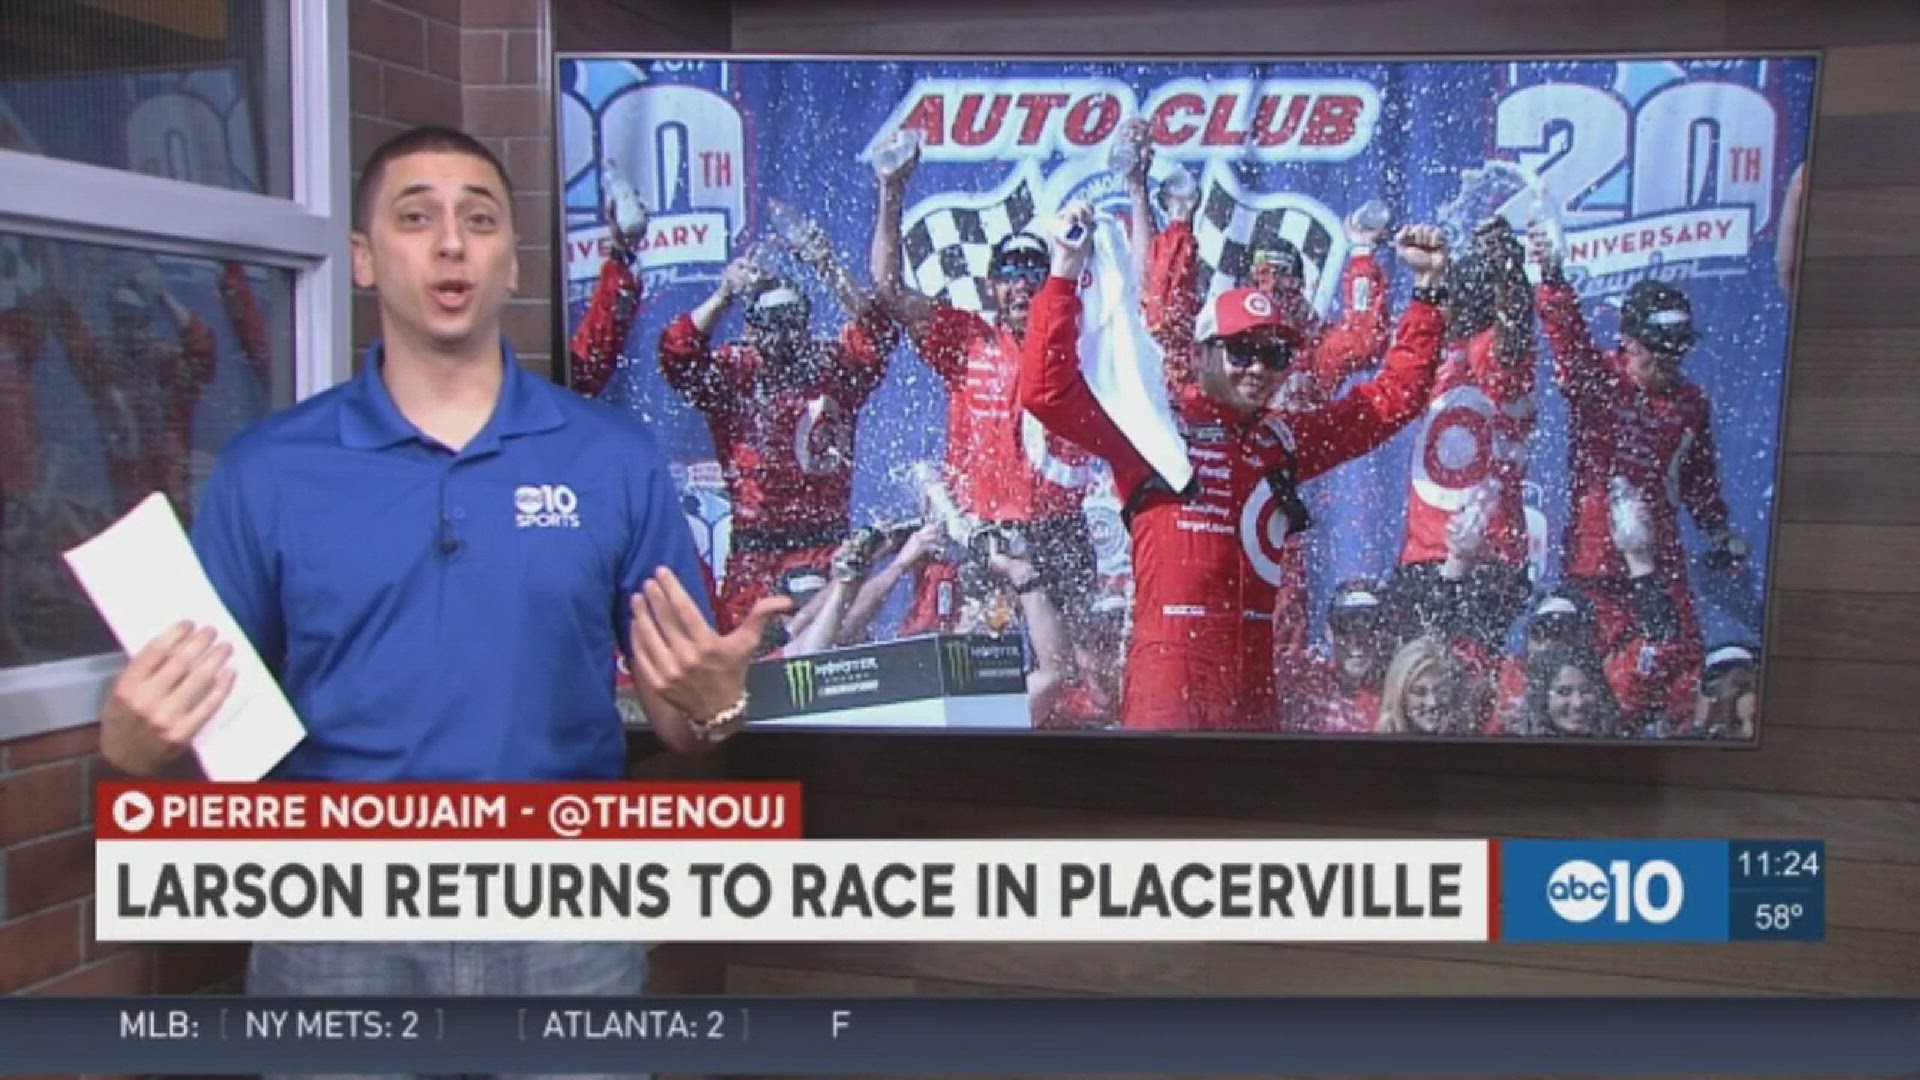 Elk Grove native Kyle Larson, the current NASCAR Cup points leader, participated in the World of Outlaws race in Placerville on Wednesday, fresh off his win last Sunday at Fontana in the Auto Club 400.